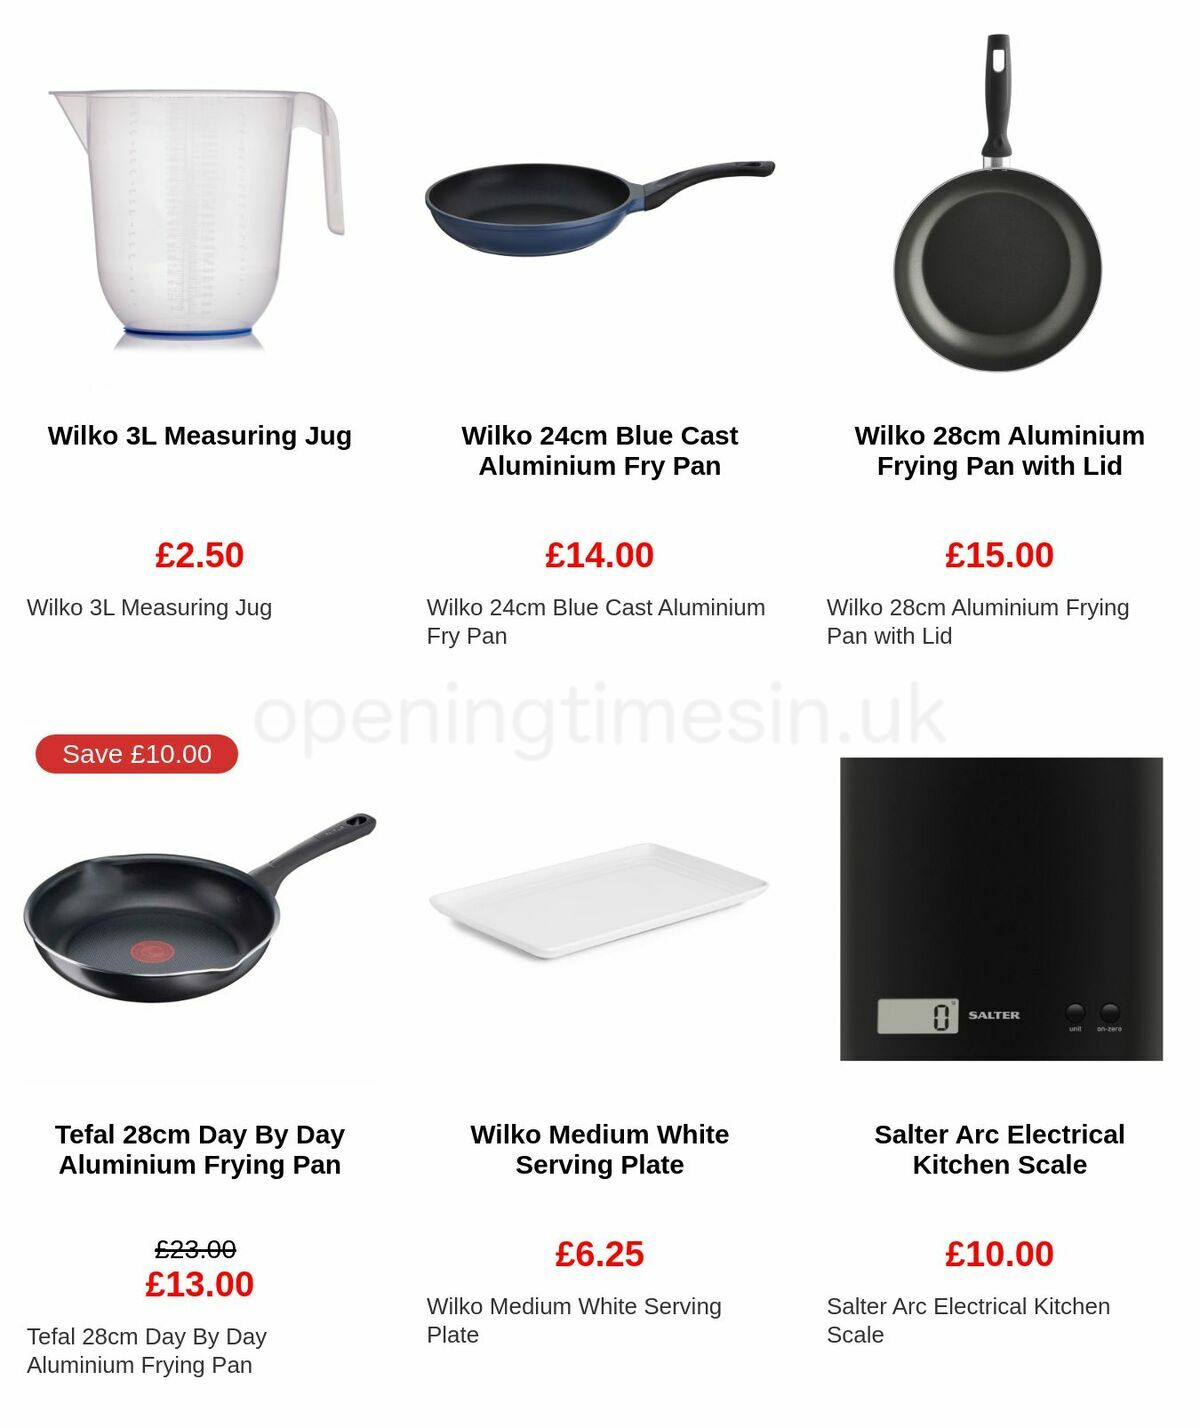 Wilko Pancake Day Offers from 12 February